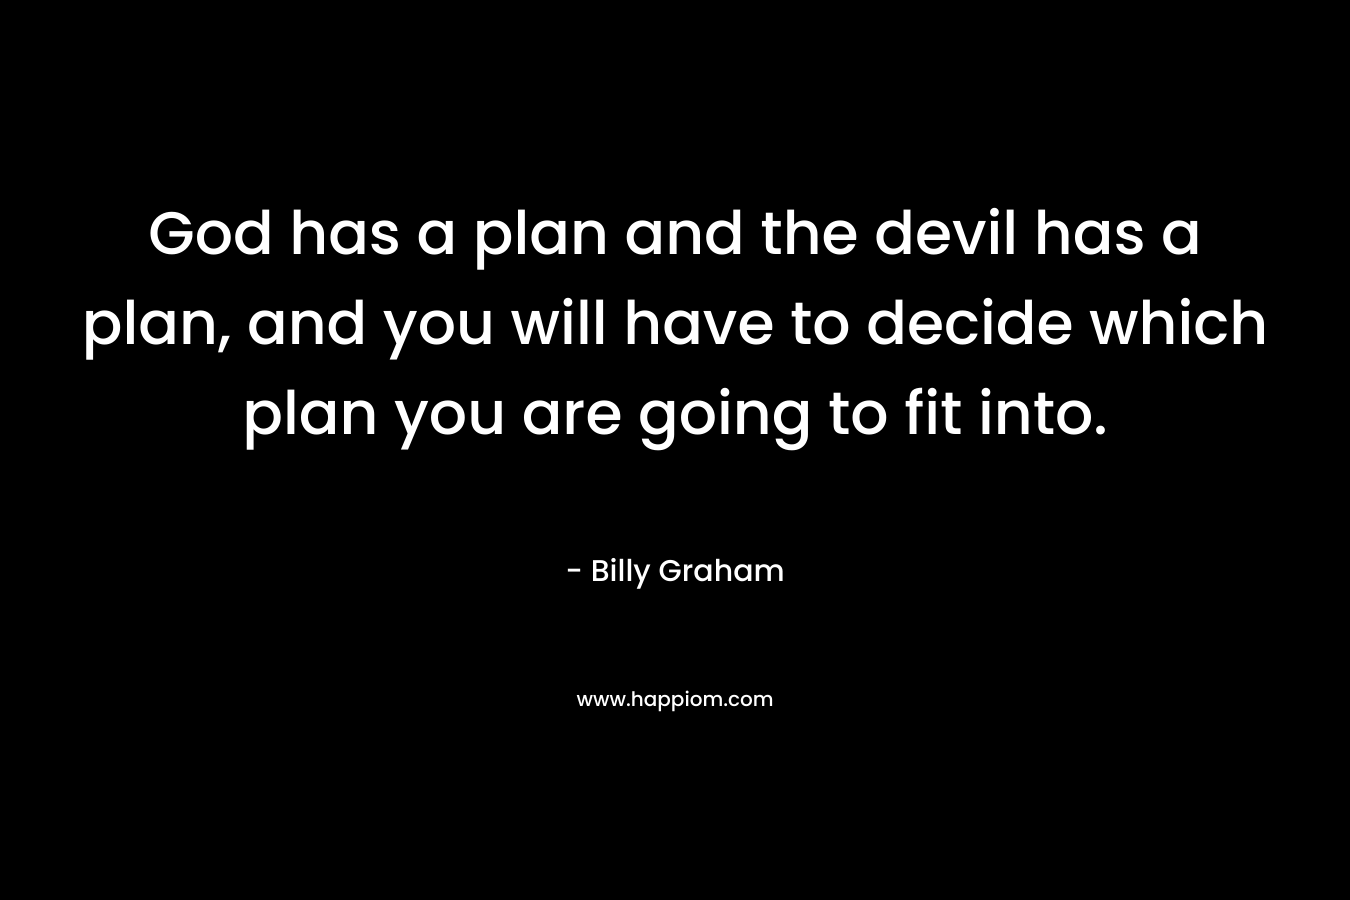 God has a plan and the devil has a plan, and you will have to decide which plan you are going to fit into.